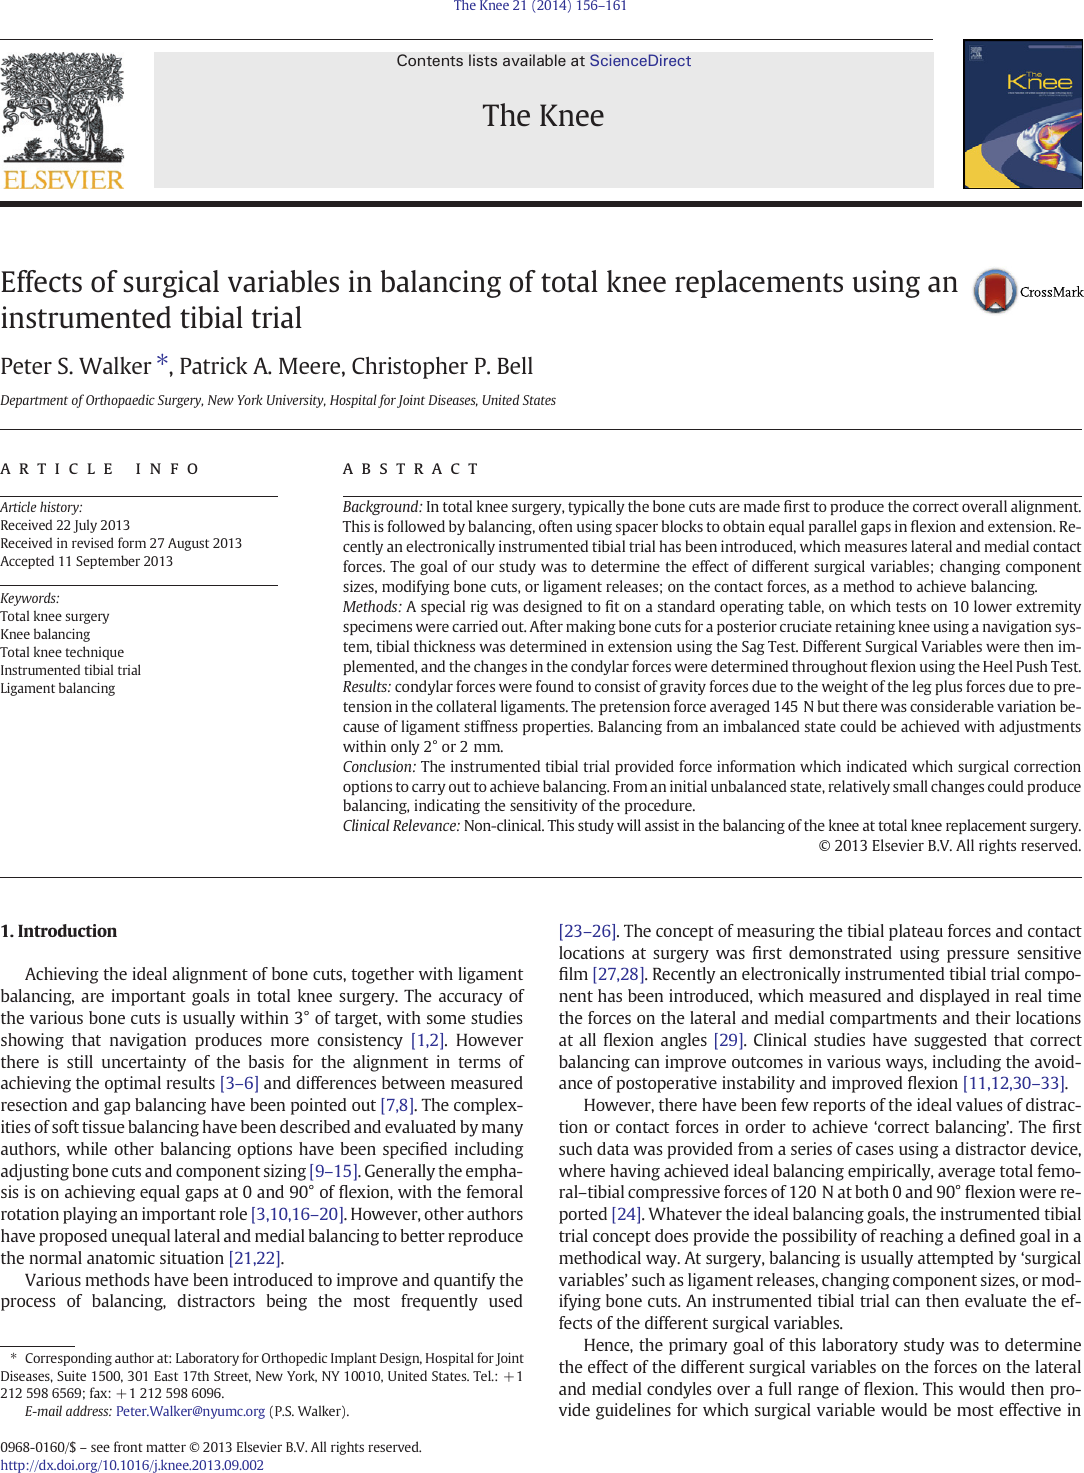 Page 1 of 6 - Effects Of Surgical Variables In Balancing Total Knee Replacements Using An Instrumented Tibial Trial  Walker Et Al Trial. The